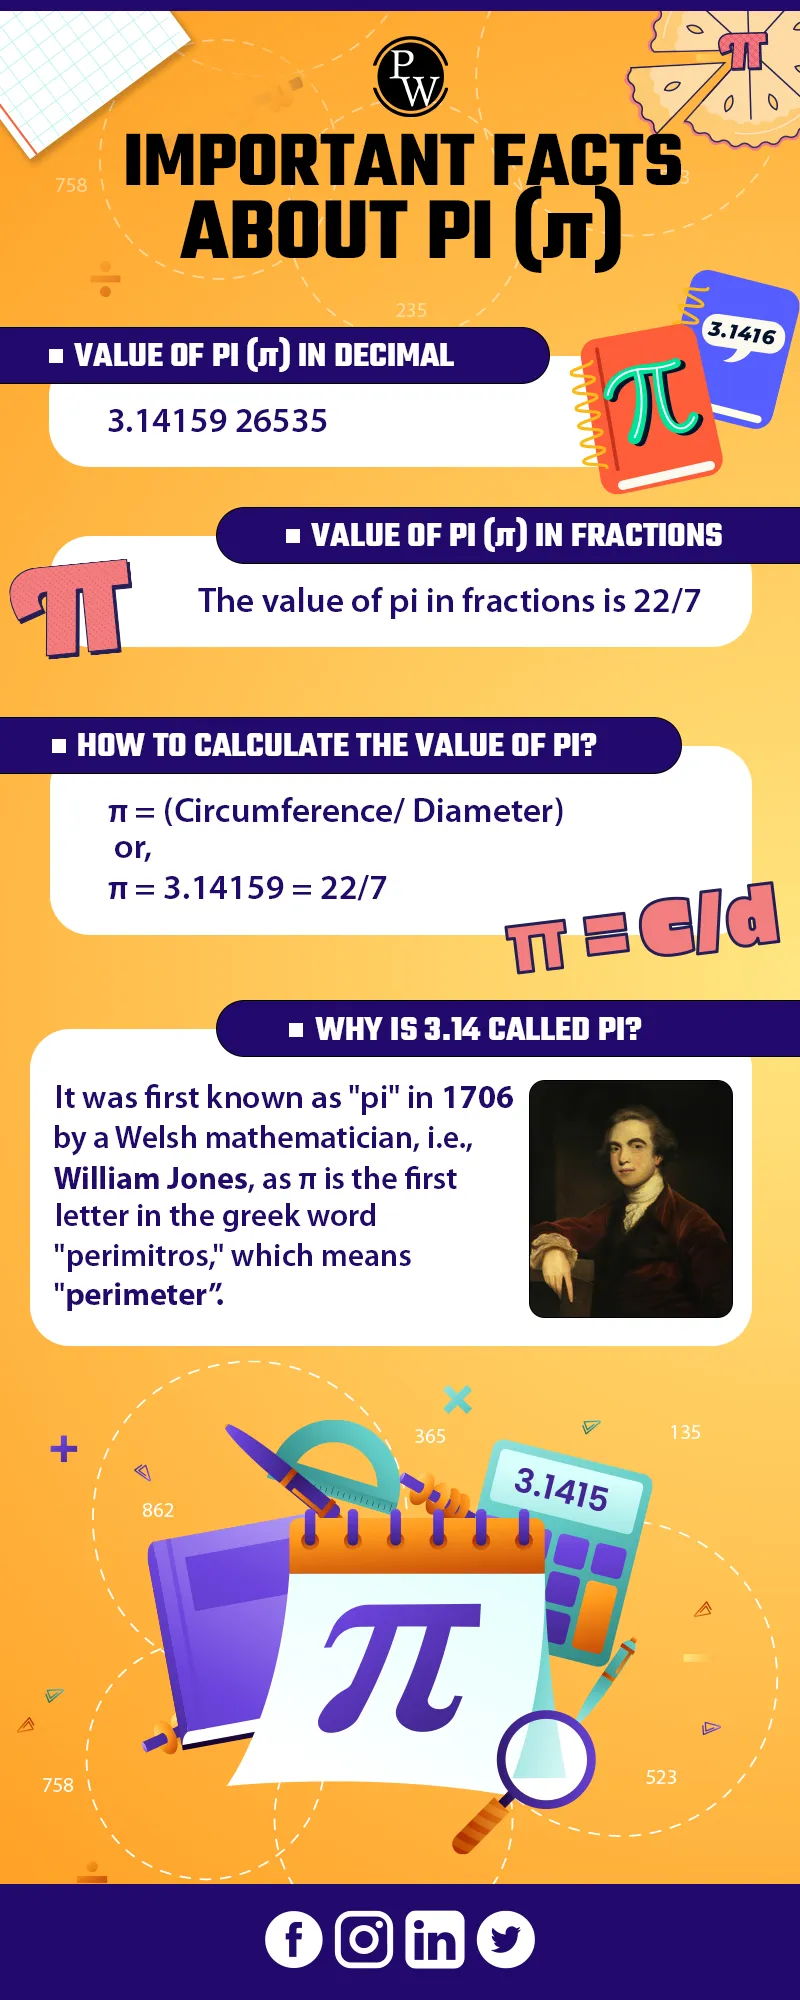 IMPORTANT FACTS ABOUT PI (π)